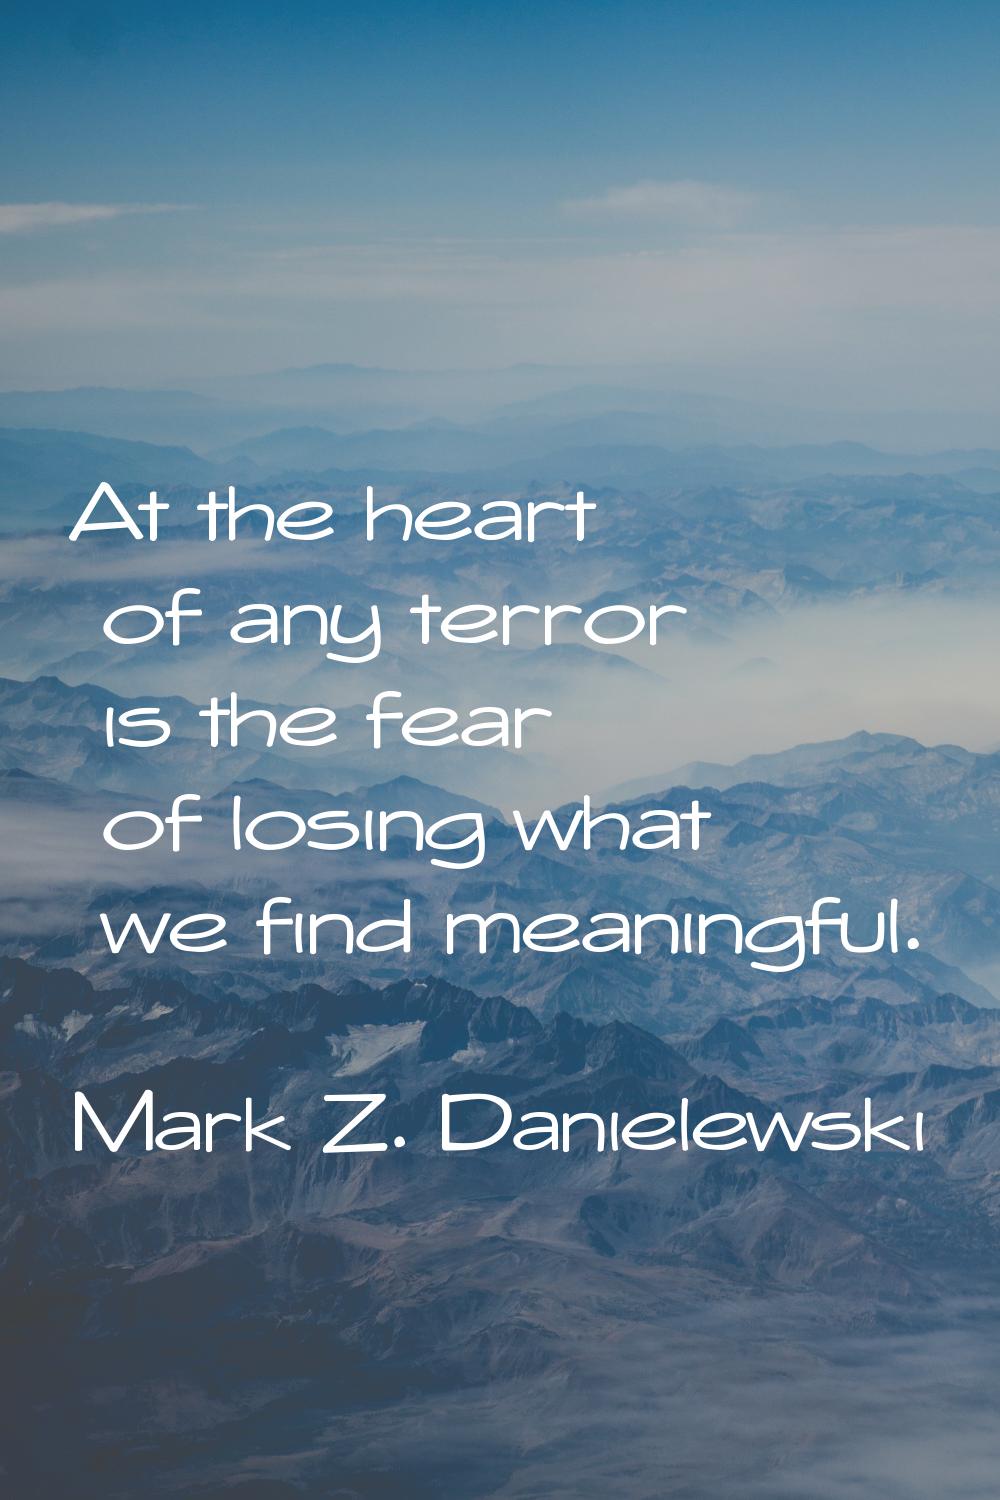 At the heart of any terror is the fear of losing what we find meaningful.